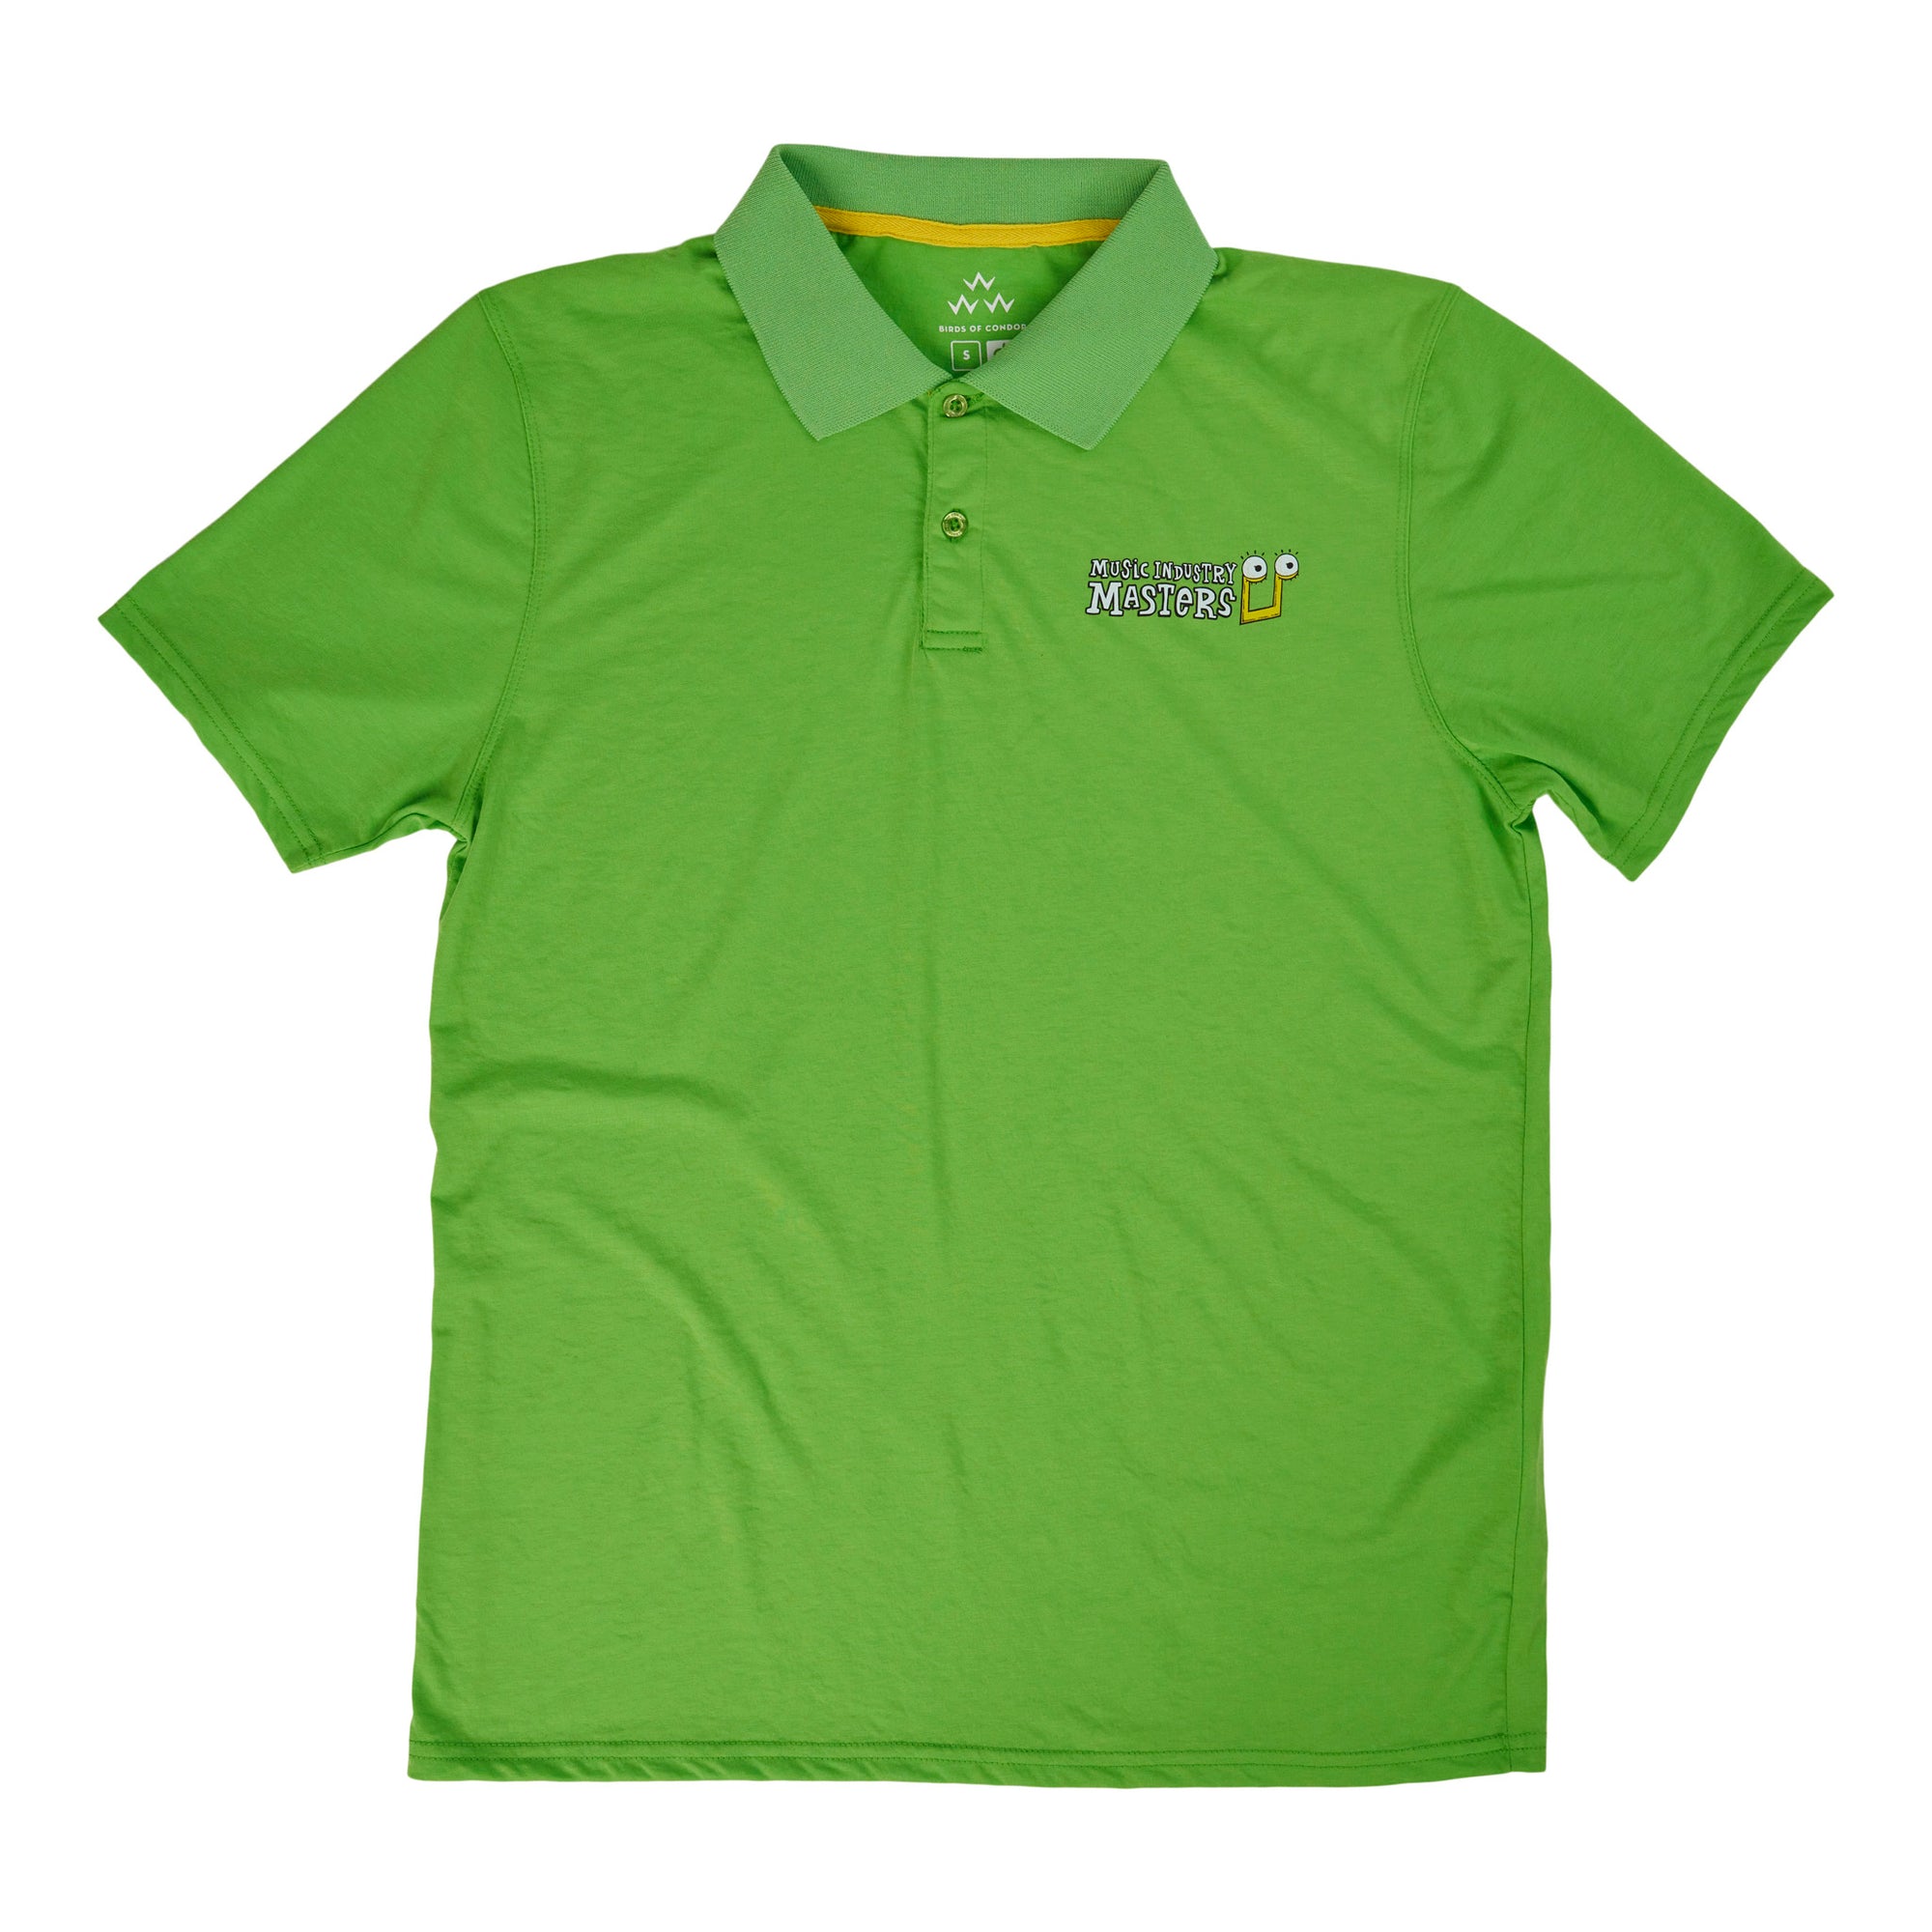 birds of condor music industry masters green polo shirt